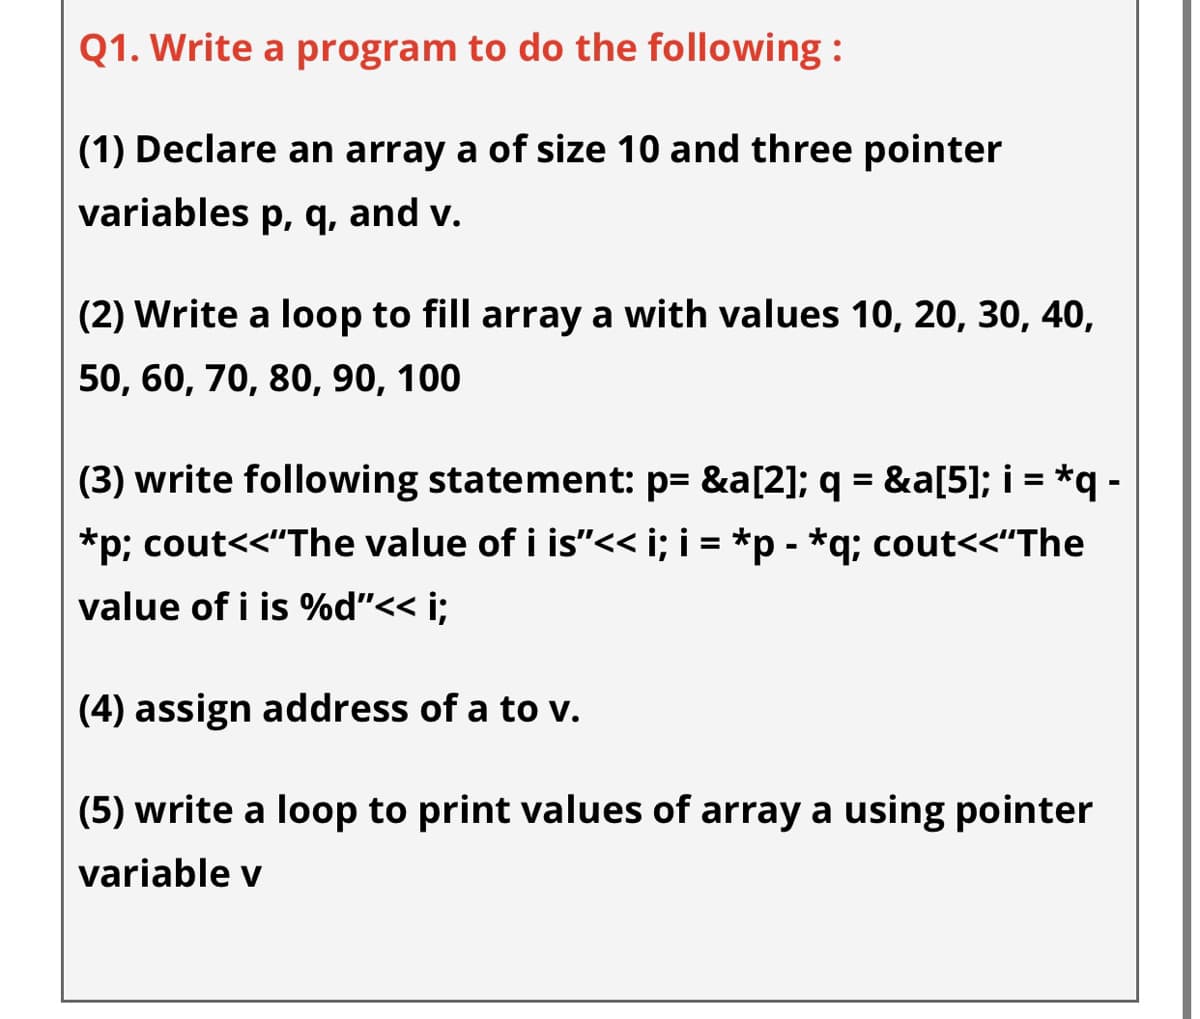 Q1. Write a program to do the following :
(1) Declare an array a of size 10 and three pointer
variables p, q, and v.
(2) Write a loop to fill array a with values 10, 20, 30, 40,
50, 60, 70, 80, 90, 100
(3) write following statement: p= &a[2]; q = &a[5]; i = *q -
*p; cout<<"The value of i is"<< i; i = *p - *q; cout<<"The
value of i is %d"<< i;
(4) assign address of a to v.
(5) write a loop to print values of array a using pointer
variable v
